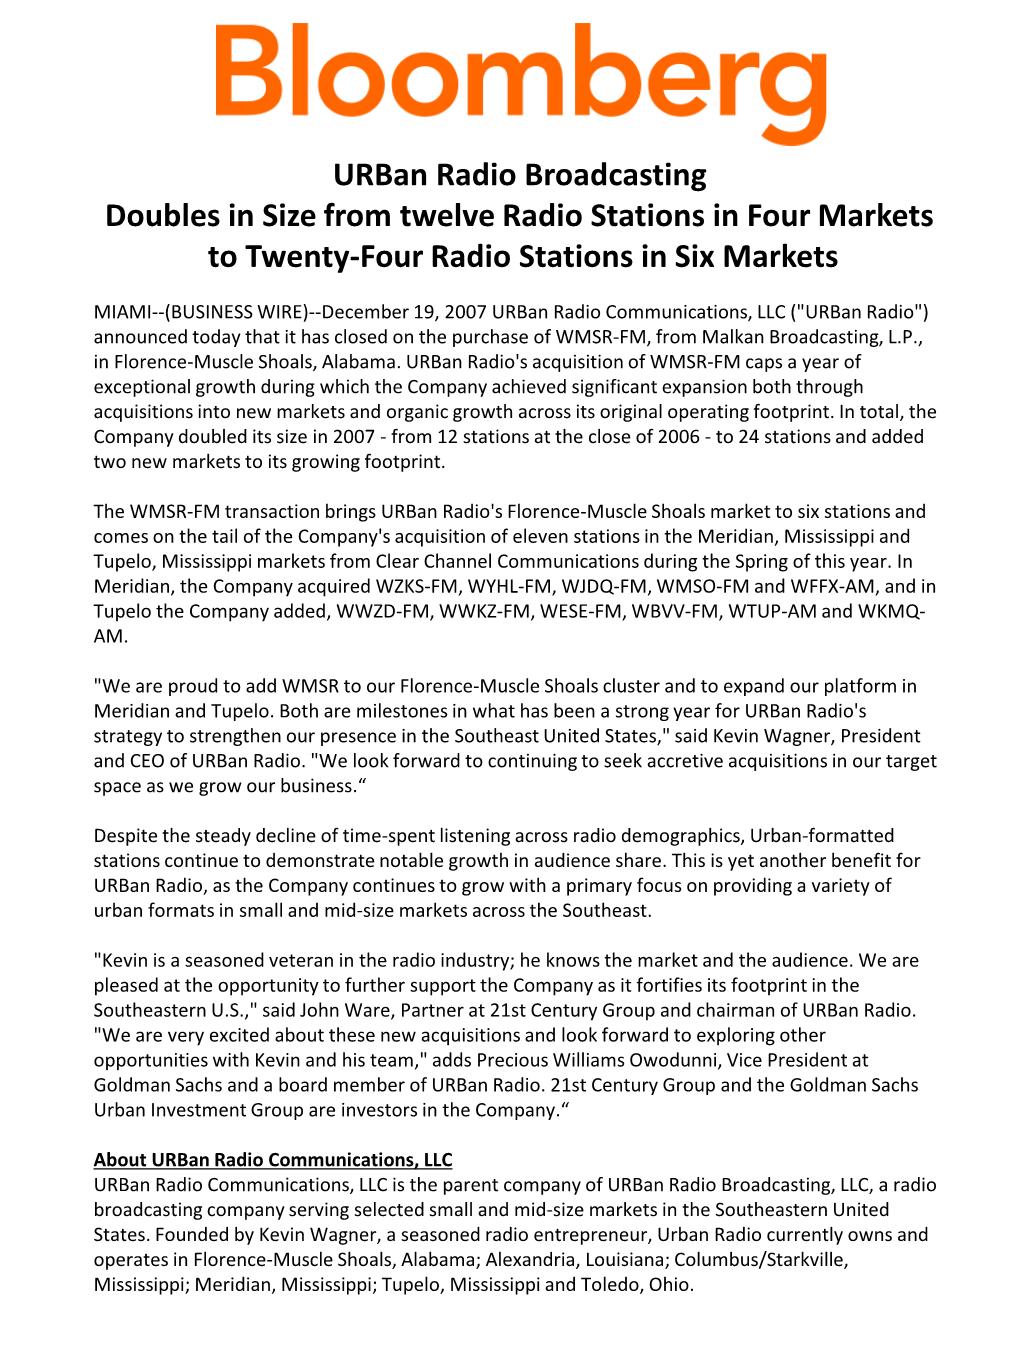 Urban Radio Broadcasting Doubles in Size from Twelve Radio Stations in Four Markets to Twenty-Four Radio Stations in Six Markets